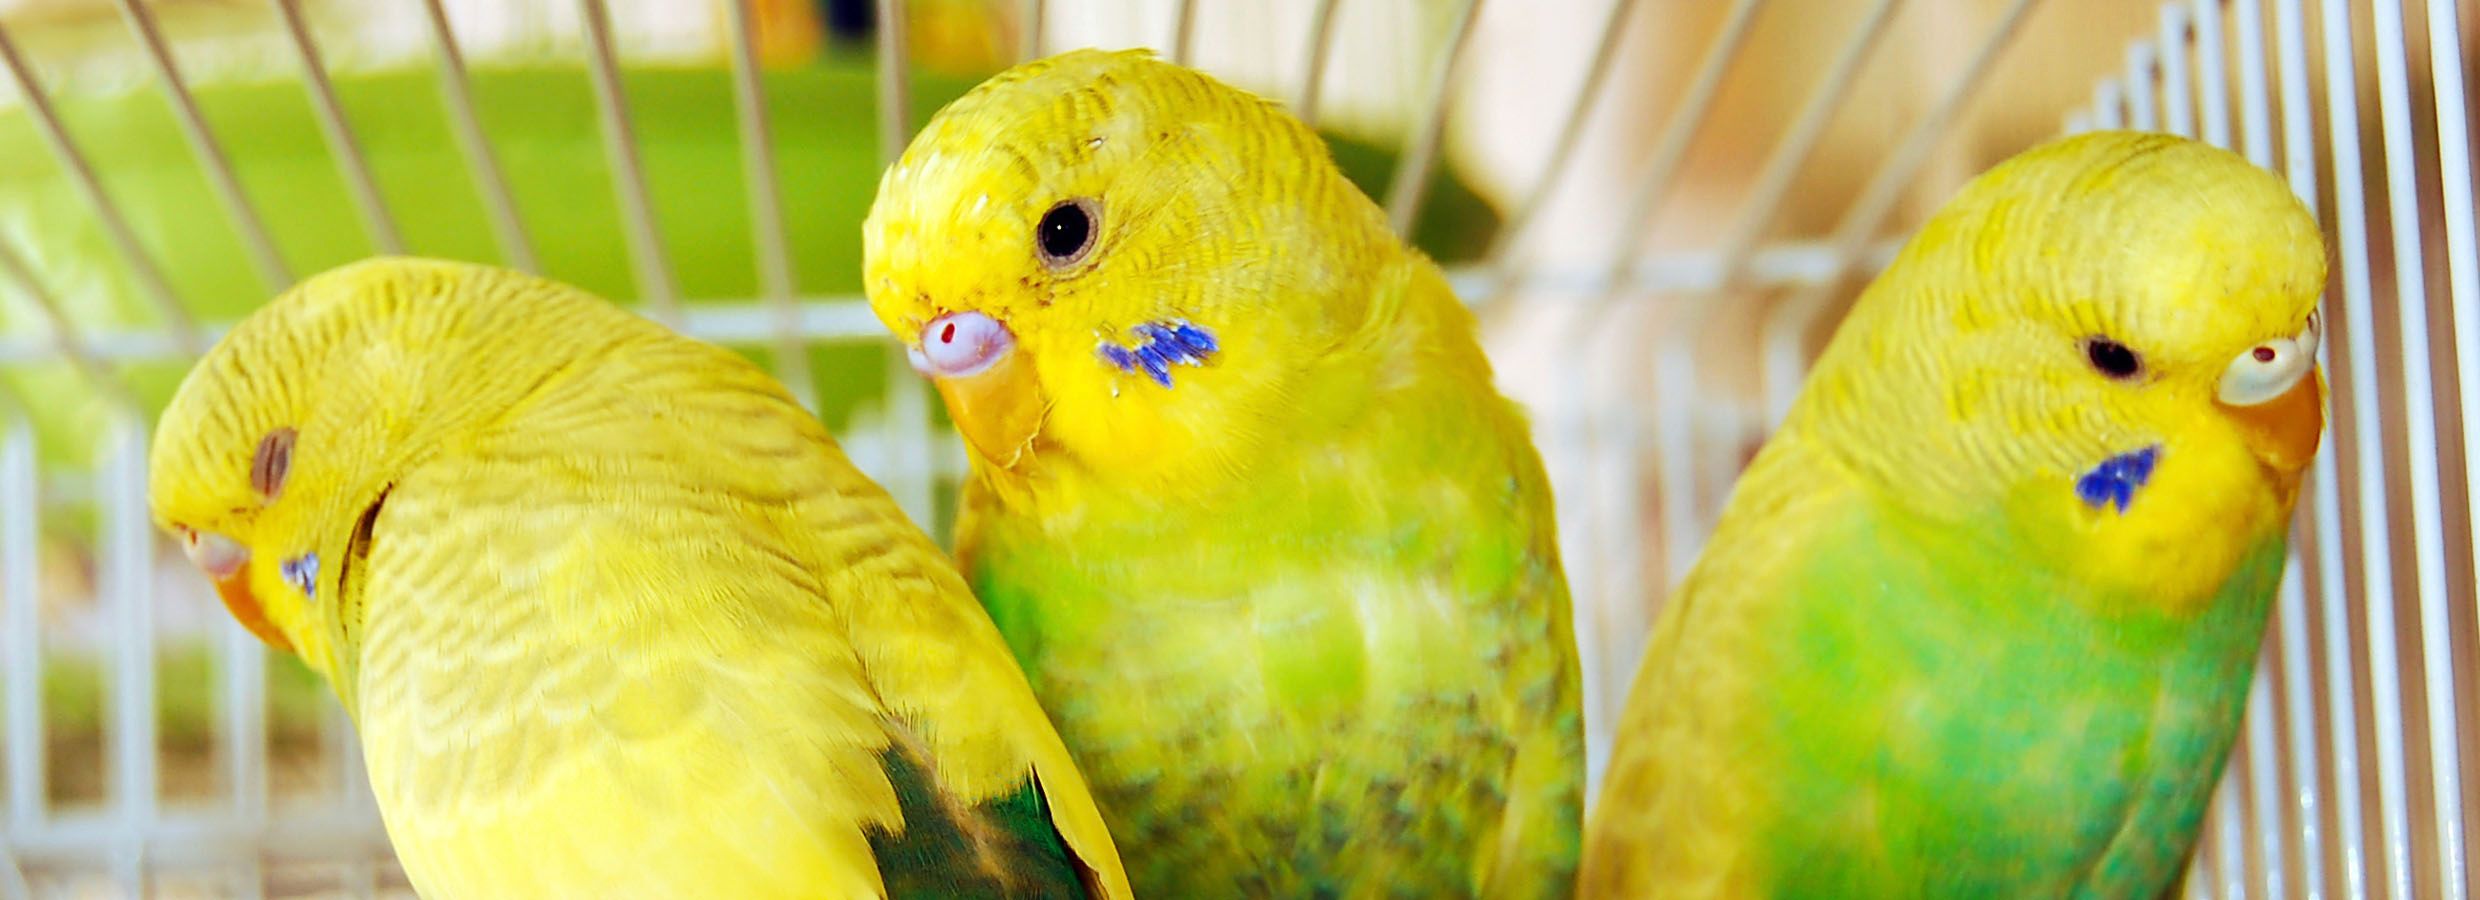 yellow green parakeet playing with toy